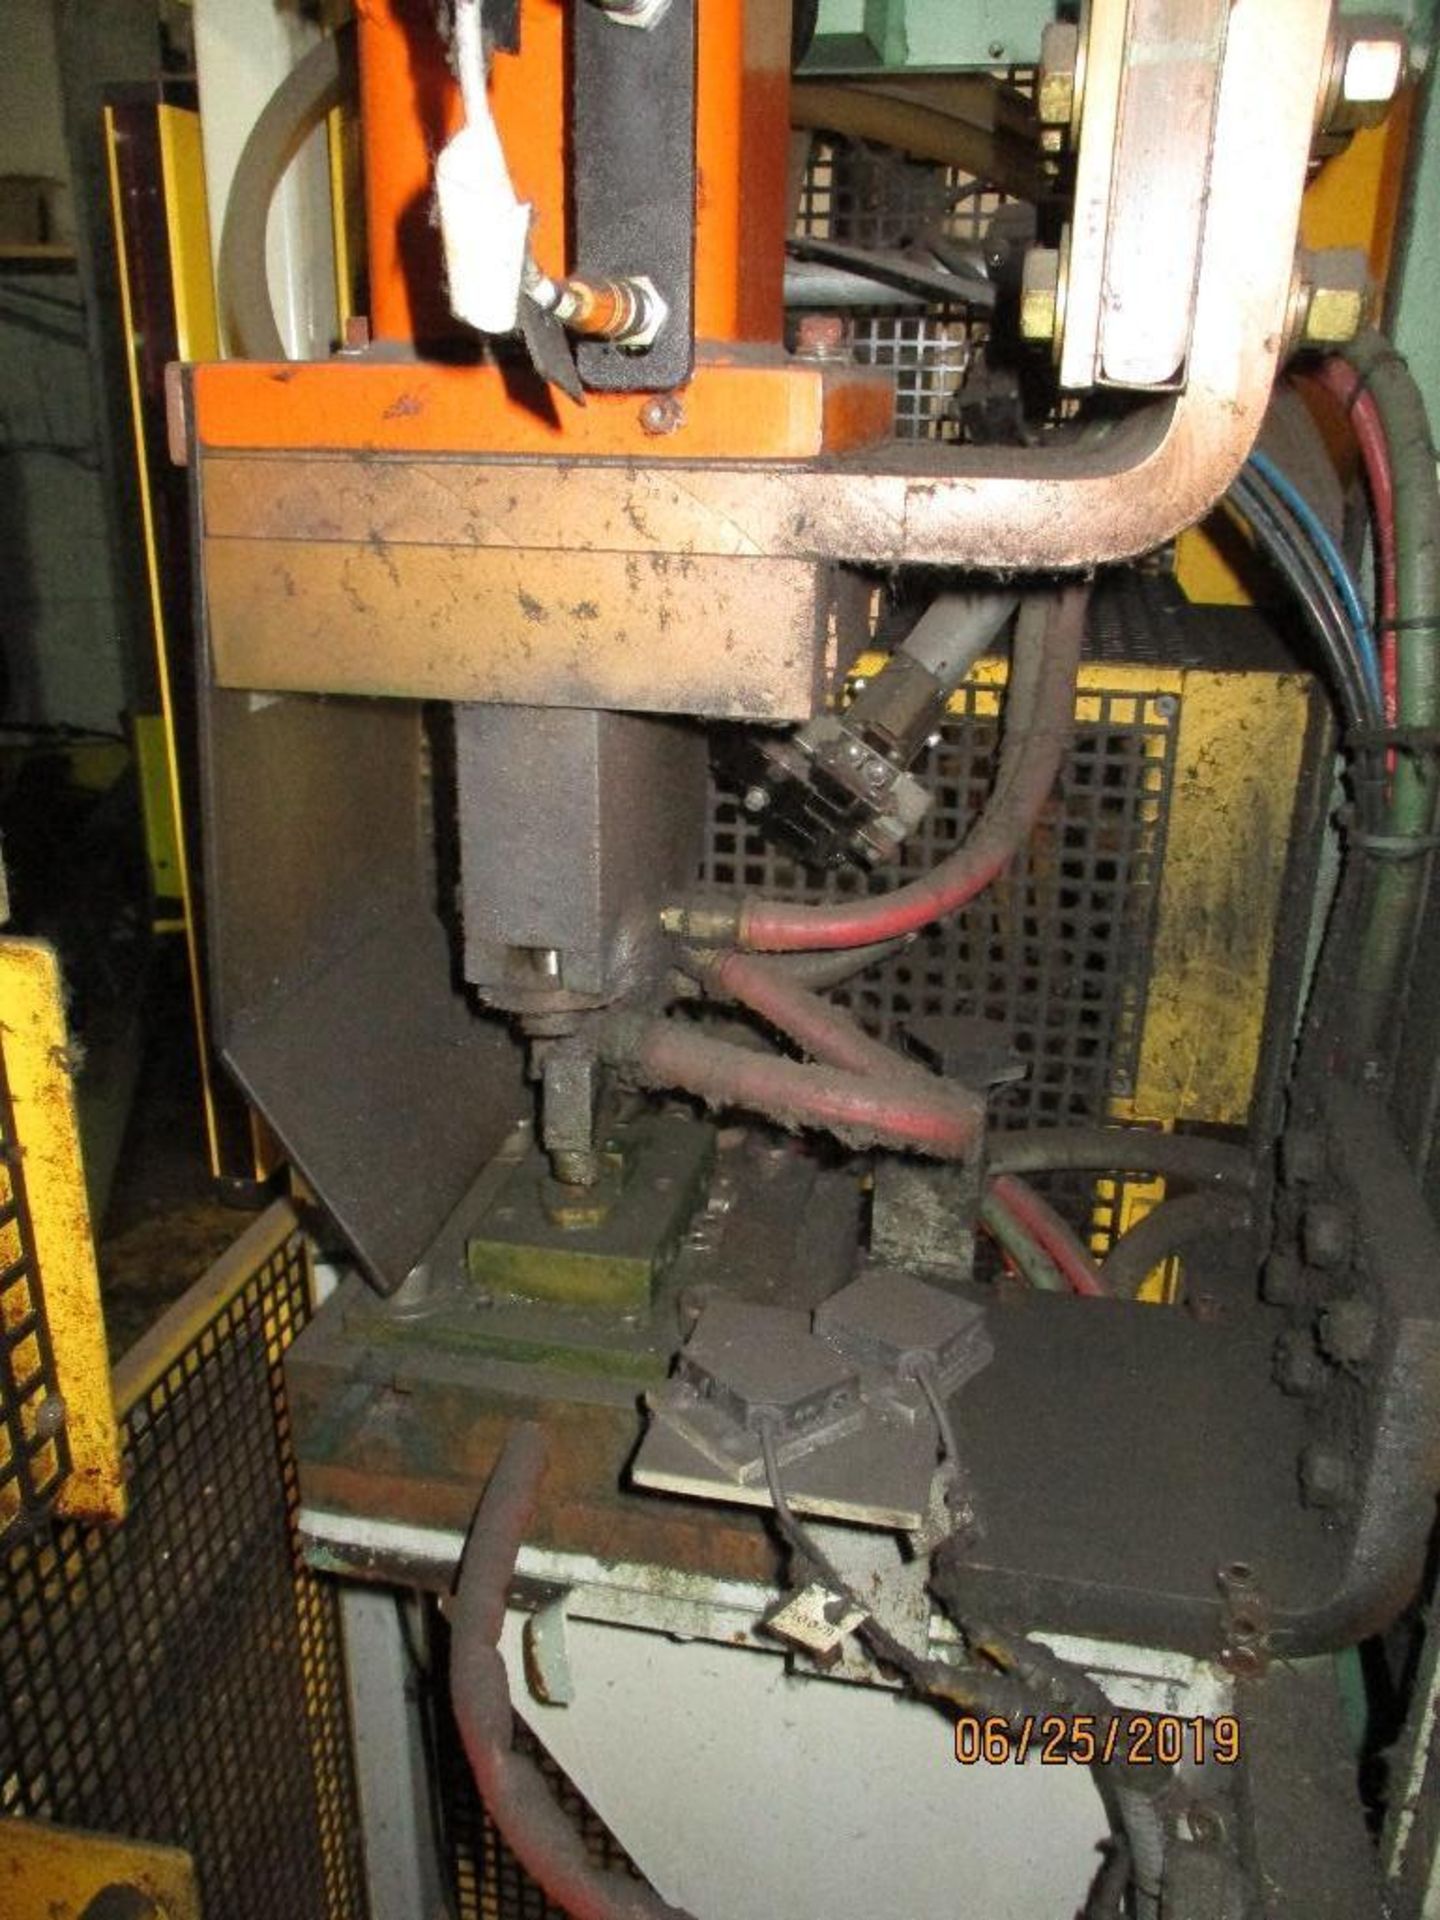 Banner Spot Welder M/N 2AP150A1 S/N 7340, Located at 800 West Broadway St. Three Rivers, MI. 49095 - Image 7 of 10